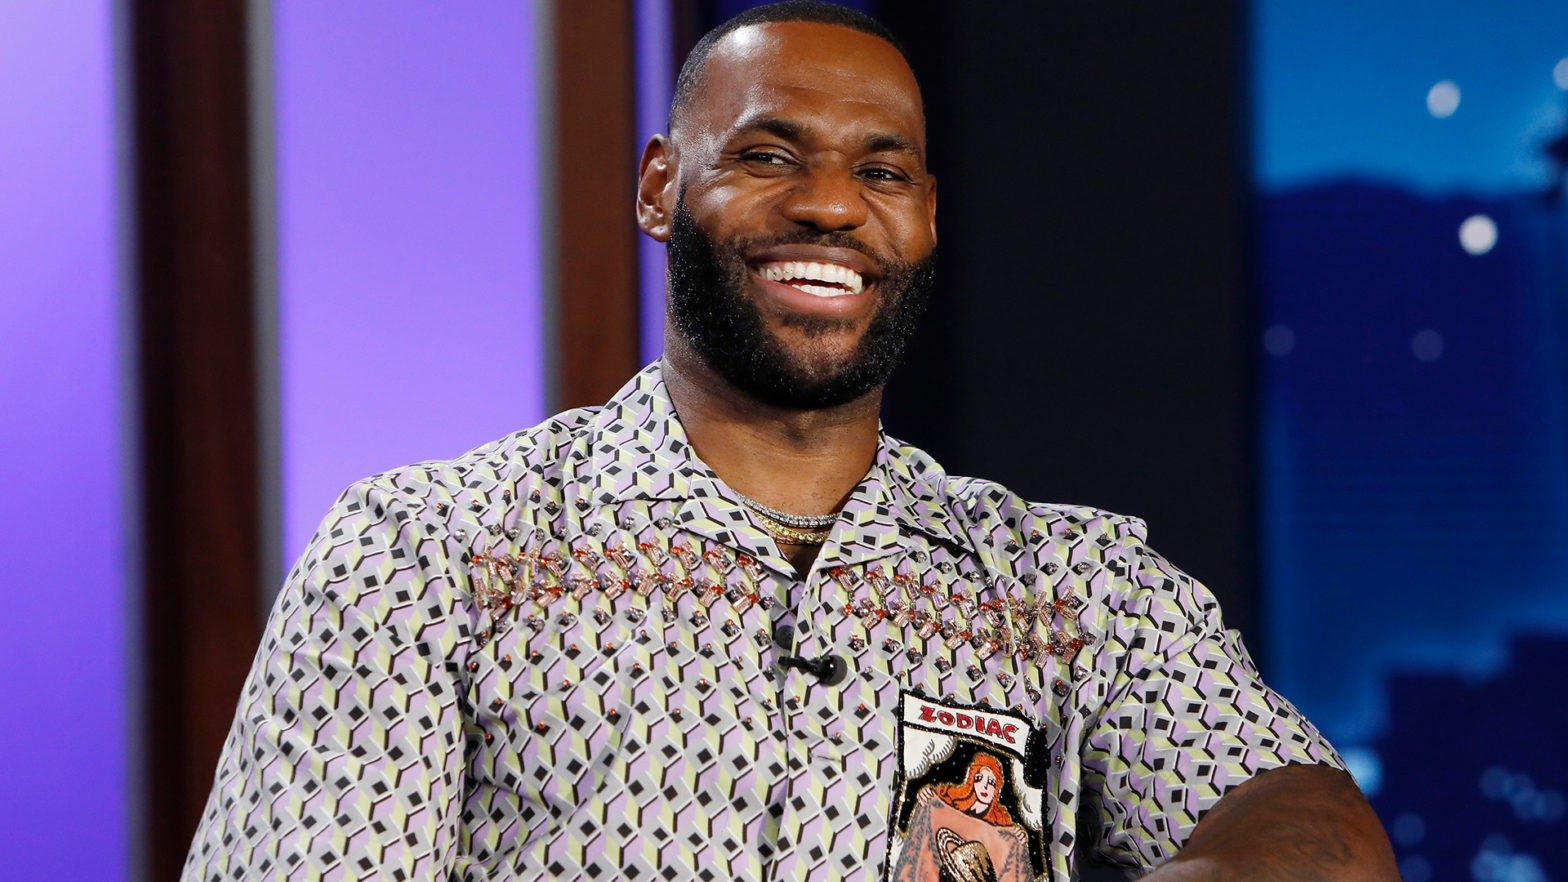 One Of LeBron James' Rare Rookie Cards Could Sell For Up To $1.2M In An Auction